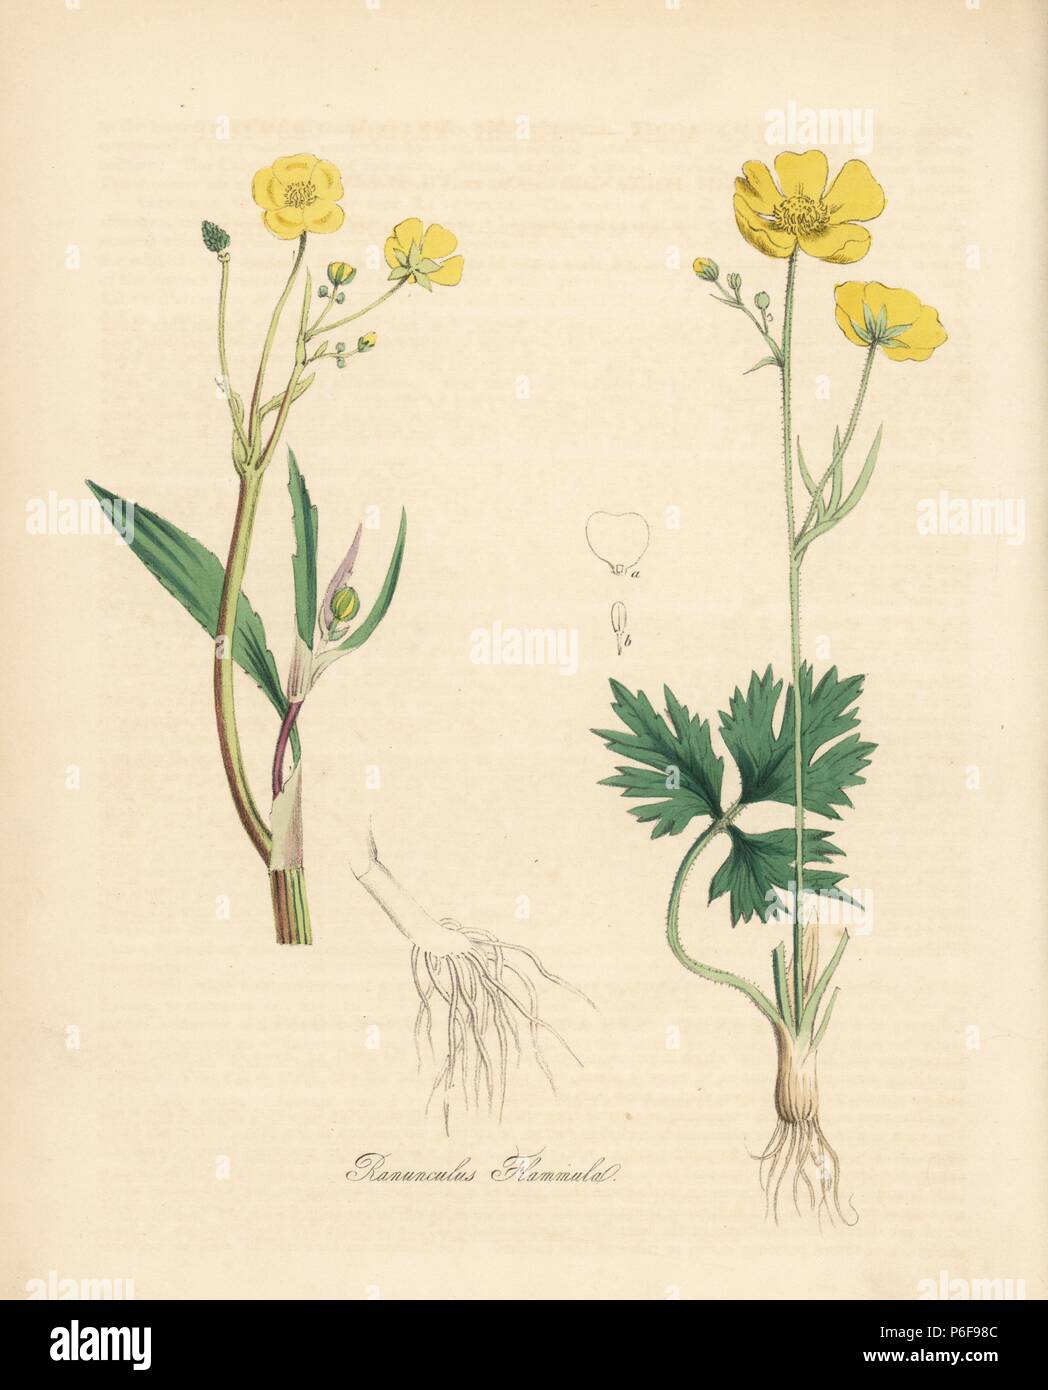 Lesser spearwort or banewort, Ranunculus flammula, and meadow buttercup, Ranunculus acris. Handcoloured zincograph by C. Chabot drawn by Miss M. A. Burnett from her 'Plantae Utiliores: or Illustrations of Useful Plants,' Whittaker, London, 1842. Miss Burnett drew the botanical illustrations, but the text was chiefly by her late brother, British botanist Gilbert Thomas Burnett (1800-1835). Stock Photo